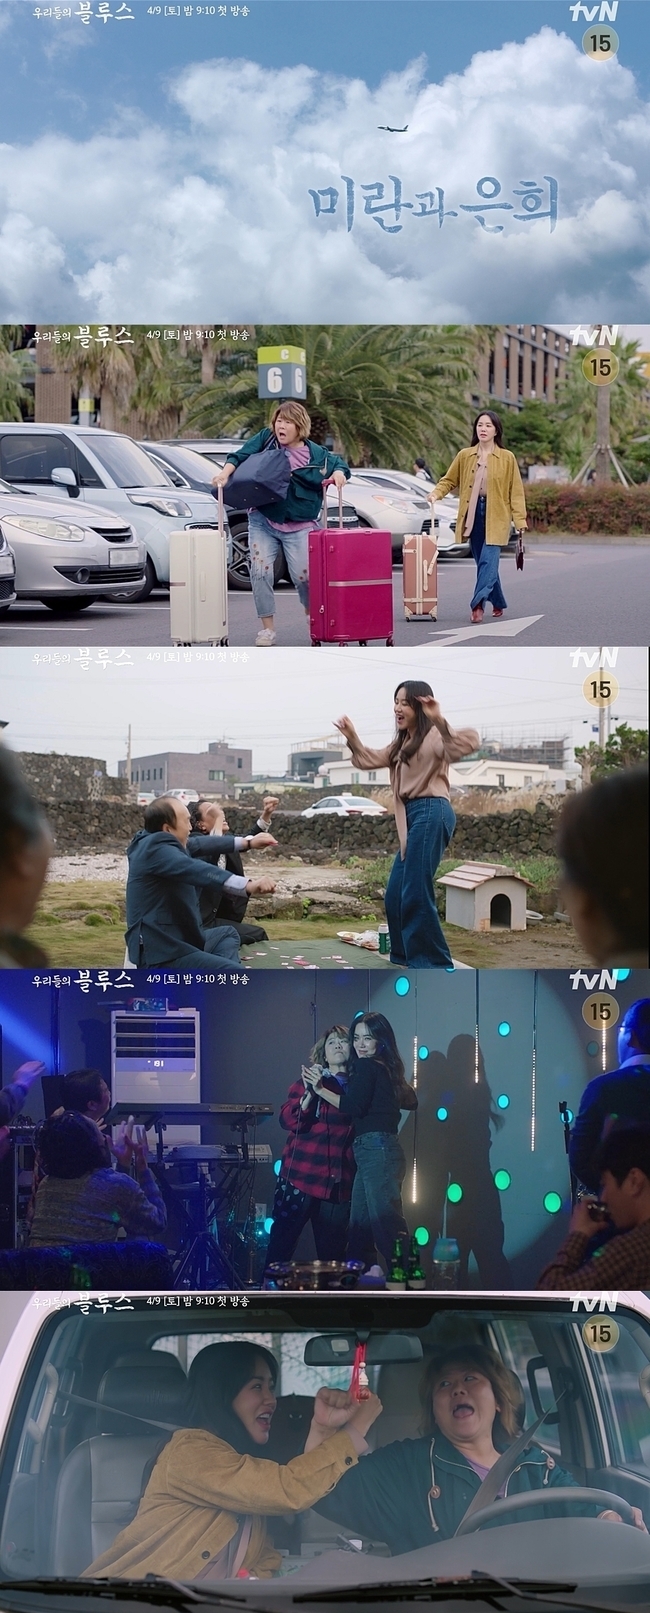 The Episode teaser, which features the creaking friendship of actors Uhm Jung-hwa and Lee Jung Eun and two Friends, was unveiled.The TVN new Saturday drama Our Blues (playplayed by Noh Hee-kyung/directed by Kim Kyu-tae), which will be broadcast on April 9, is an omnibus drama that supports the life of everyone standing at the end or peak of life and the beginning.Lee Byung-hun, Shin Min-a, Cha Seung Won, Lee Jung Eun, Han Ji-min, Kim Woo-bin, Kim Hye-ja, Goh Doo-shim, and Uhm Jung-hwa are gathering topics with a cast lineup of 14 actors.The Episode teaser of Uhm Jung-hwa and Lee Jung Eun, released on March 9, tells the story of two Friends Gomiran and Jung Eun-hee who grew up in the village of Jeju Island Pureung and spent their school days.Lee Jung Eun plays Jung Eun-hee, the president of the Jeju Island market, who runs a self-made fish shop, and Uhm Jung-hwa plays the role of First Love Gomiran, a man of the Jeju Island Purung Village men who was beautiful, played well and lived well and envied by everyone.The video begins with a narration by Lee Jung Eun, The eternal star: My best friend, Gomiran, has appeared in the village of Furung in three years.Along with this, Uhm Jung-hwa, who left Jeju Island and was living in Seoul, came to play with Jeju Island.The tumultuous appearance of Uhm Jung-hwa makes the town of Pureung, Jeju Island shake up.The male friends are excited about the appearance of First Love during school days, and everyones Queen Uhm Jung-hwa is pleasant and hot with the friends.But with everyone welcoming Uhm Jung-hwa, only his best friend Lee Jung Eun, who took the carrier of Uhm Jung-hwa like a porter, is eye-catching with a pointed response.Two people who looked like a ridiculous Friend, but Lee Jung Eun said, Why do not we fit together?It is an anhydrous next to the princess, he said bluntly, defining his relationship with Uhm Jung-hwa.Uhm Jung-hwas thoughts seem different. Uhm Jung-hwa says, Im one body with Eun-hee and I, generously exchanged and united in loyalty!Why did the two friends have different ideas about each other?The last appearance of those who cross their arms with the shout Loyalty! makes them wonder whether the relationship between the two friends can be well maintained and the story of the 30-year friendship of the creaking people.Above all, two actors who have been active in drama and movie, Uhm Jung-hwa and Lee Jung Eun, are attracting attention.If you are acting, you will believe, and two actors of different colors and personality met.Uhm Jung-hwa and Lee Jung Eun, who have already been fully immersed in the teaser with Gomiran and Jung Eun-hee, are drawing a long-time Teachin.I am looking forward to the broadcast of the two Friends chemie of affection to show them.Our Blues is a work co-ordinated by director Noh Hee-kyung and director Kim Kyu-tae, who created well-made dramas such as Live, Its OK, Its Love, That Winter, The Wind Blows.Earlier, Lee Byung-hun and Shin Min-a followed by Uhm Jung-hwa and Lee Jung Euns Episode teaser.Episode teasers of various characters will continue to be released in the future.Our Blues will be broadcast on April 9 at 9:10 pm.